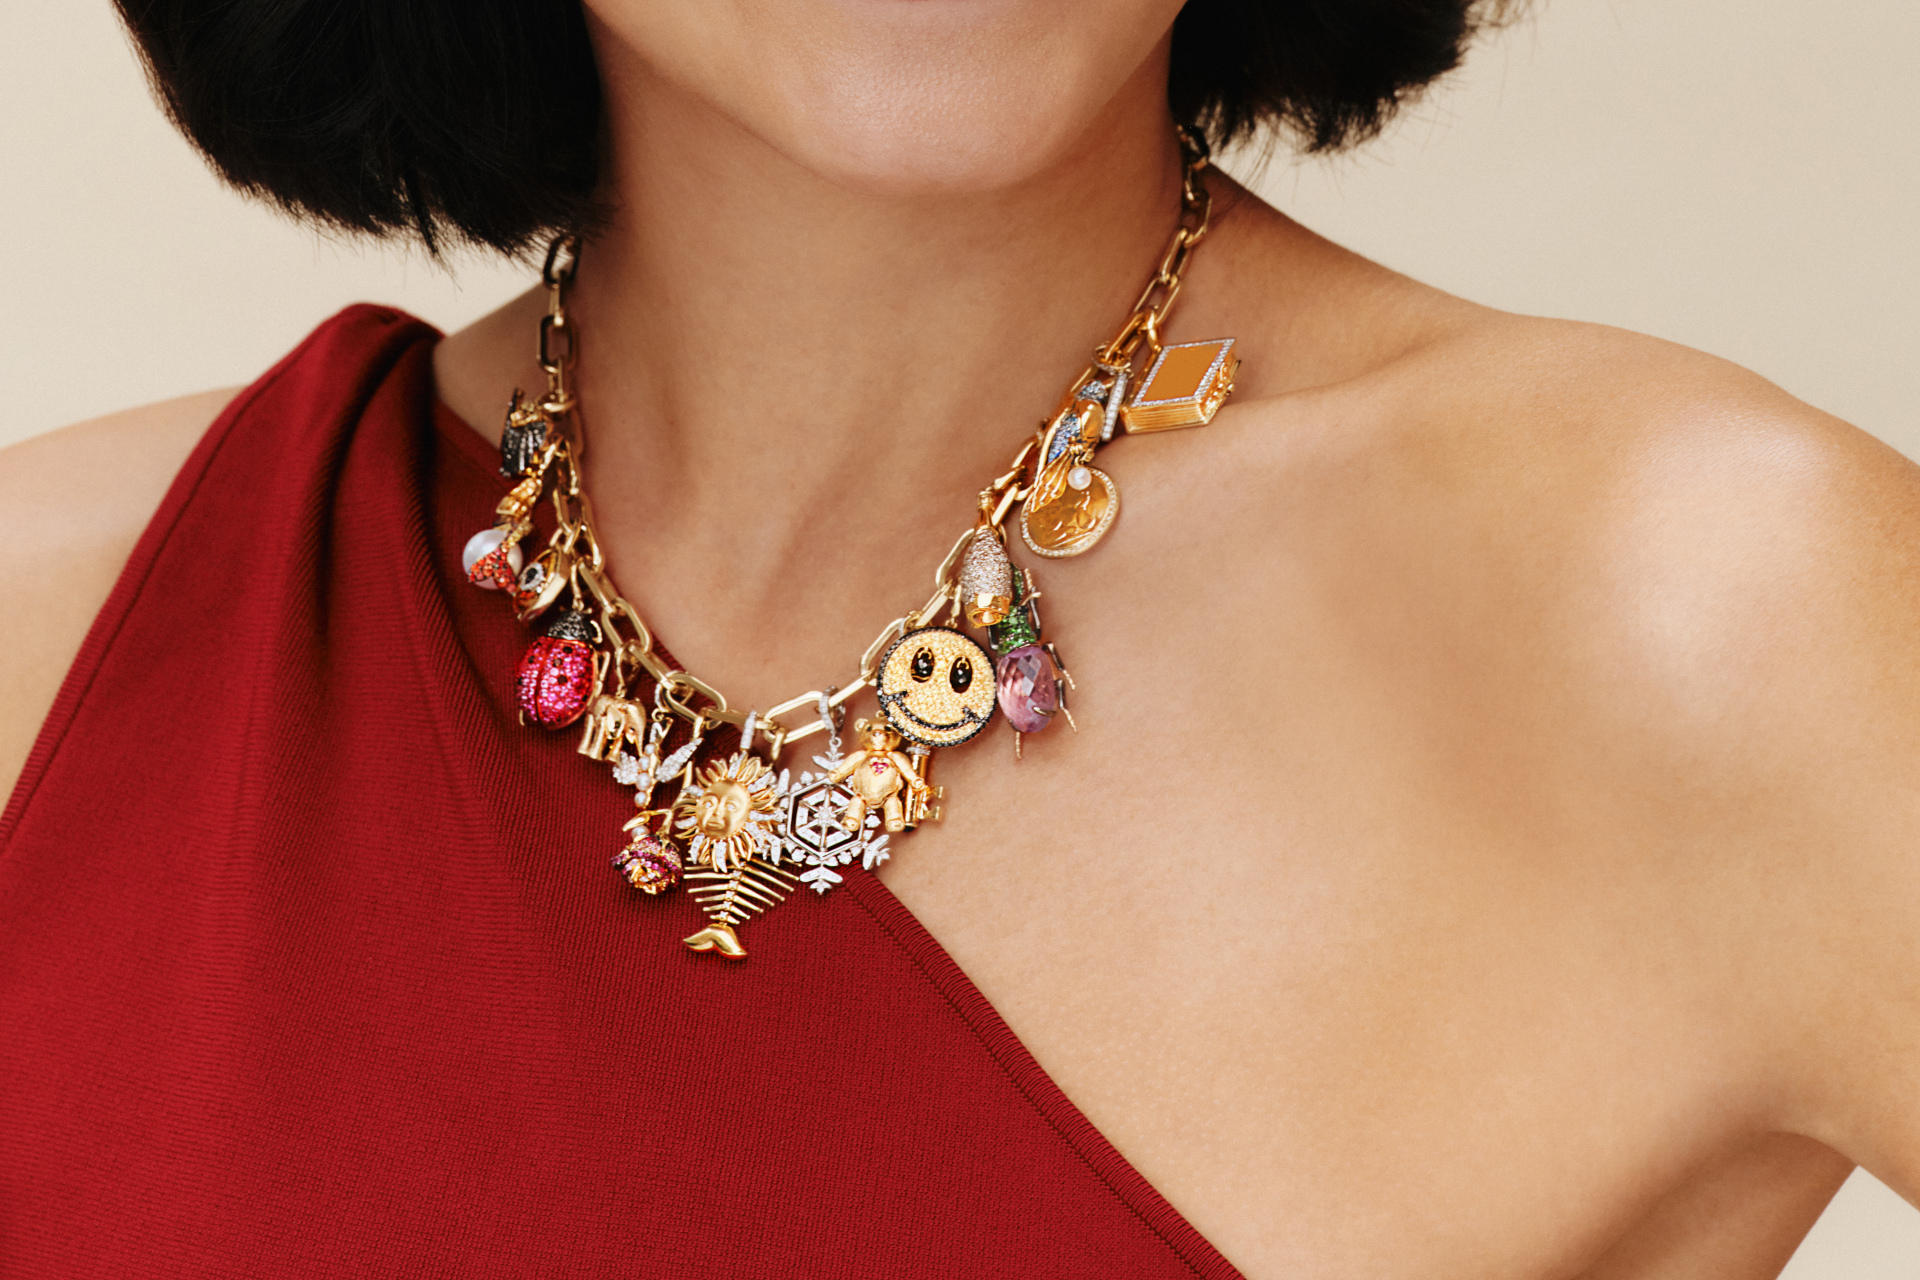 Close up of woman's neck with necklace decorated with charms